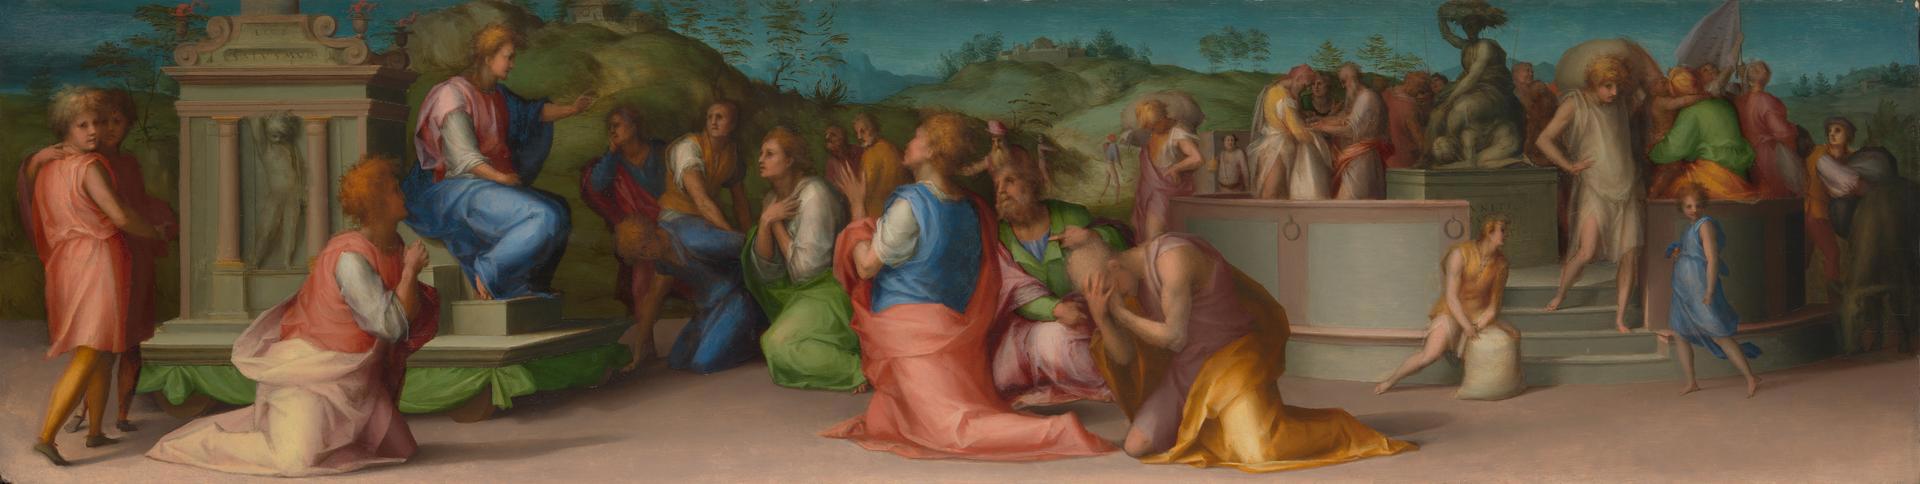 Joseph's Brothers beg for Help by Pontormo